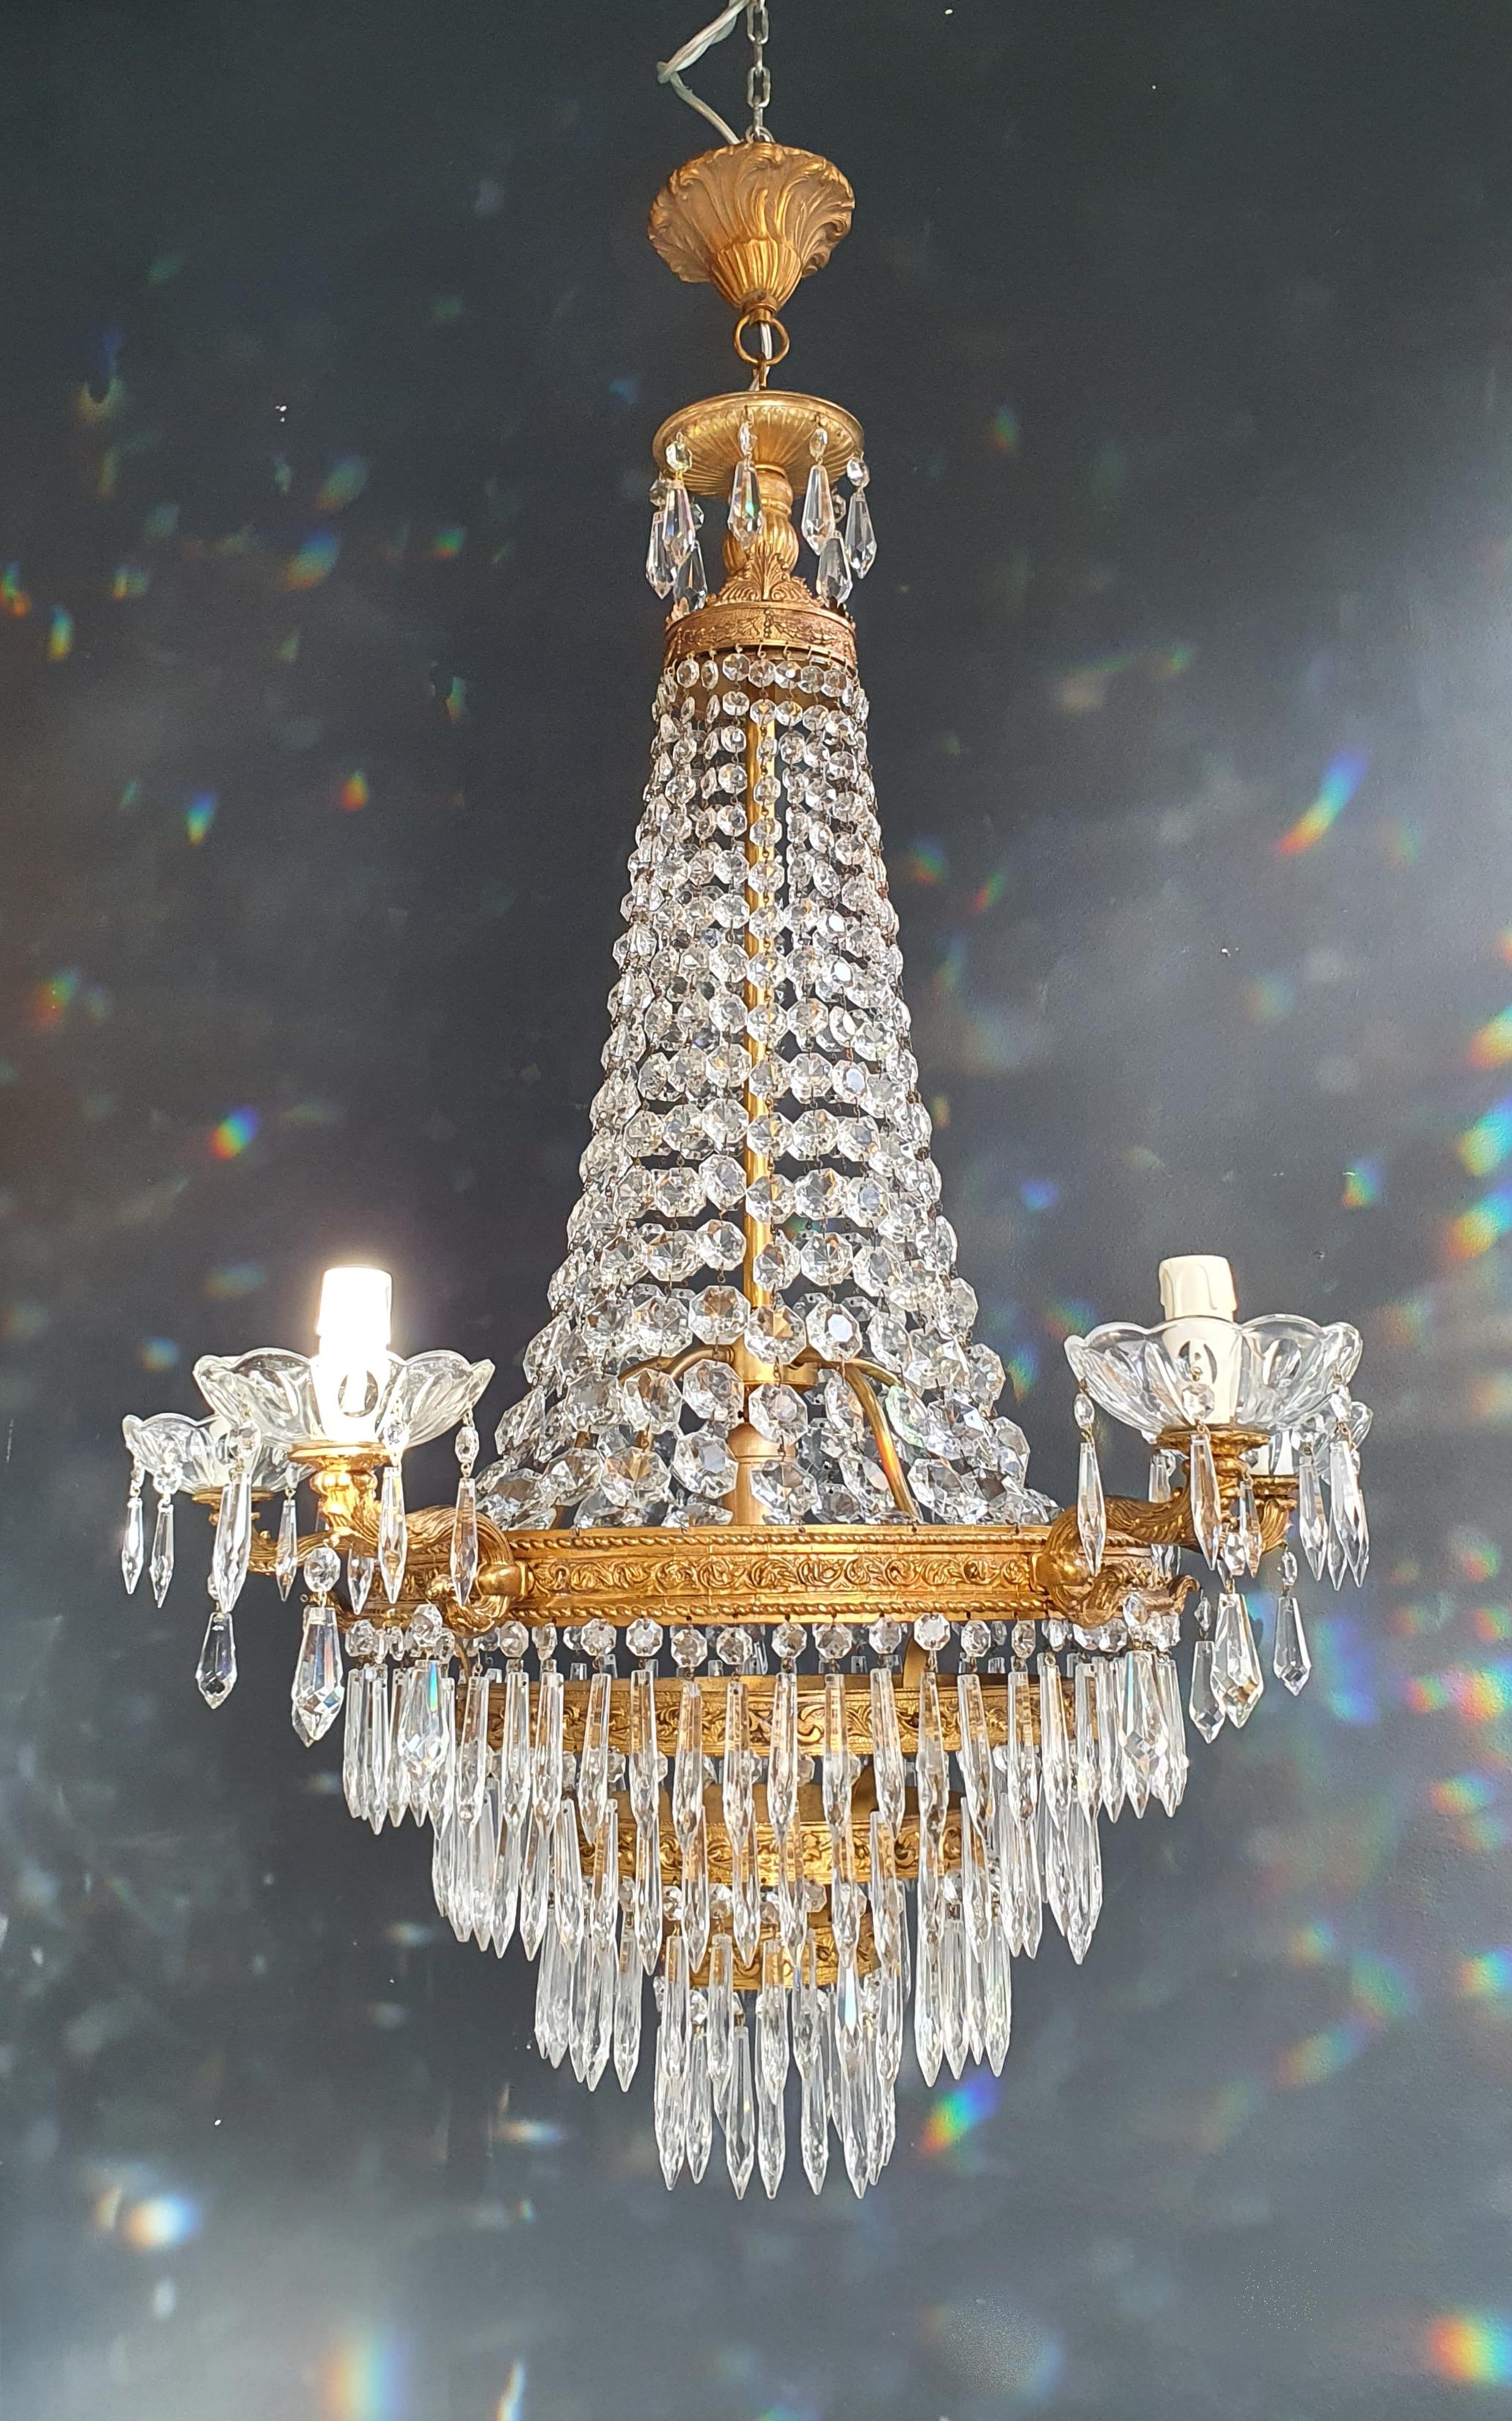 Cabling and sockets completely renewed. Crystal hand knotted
Measures: Total height 110 cm, height without chain 90 cm, diameter 68 cm, weight (approximately) 15 kg.

Number of lights: 5-light bulb sockets: E14 and 1 x E27



Montgolfiè